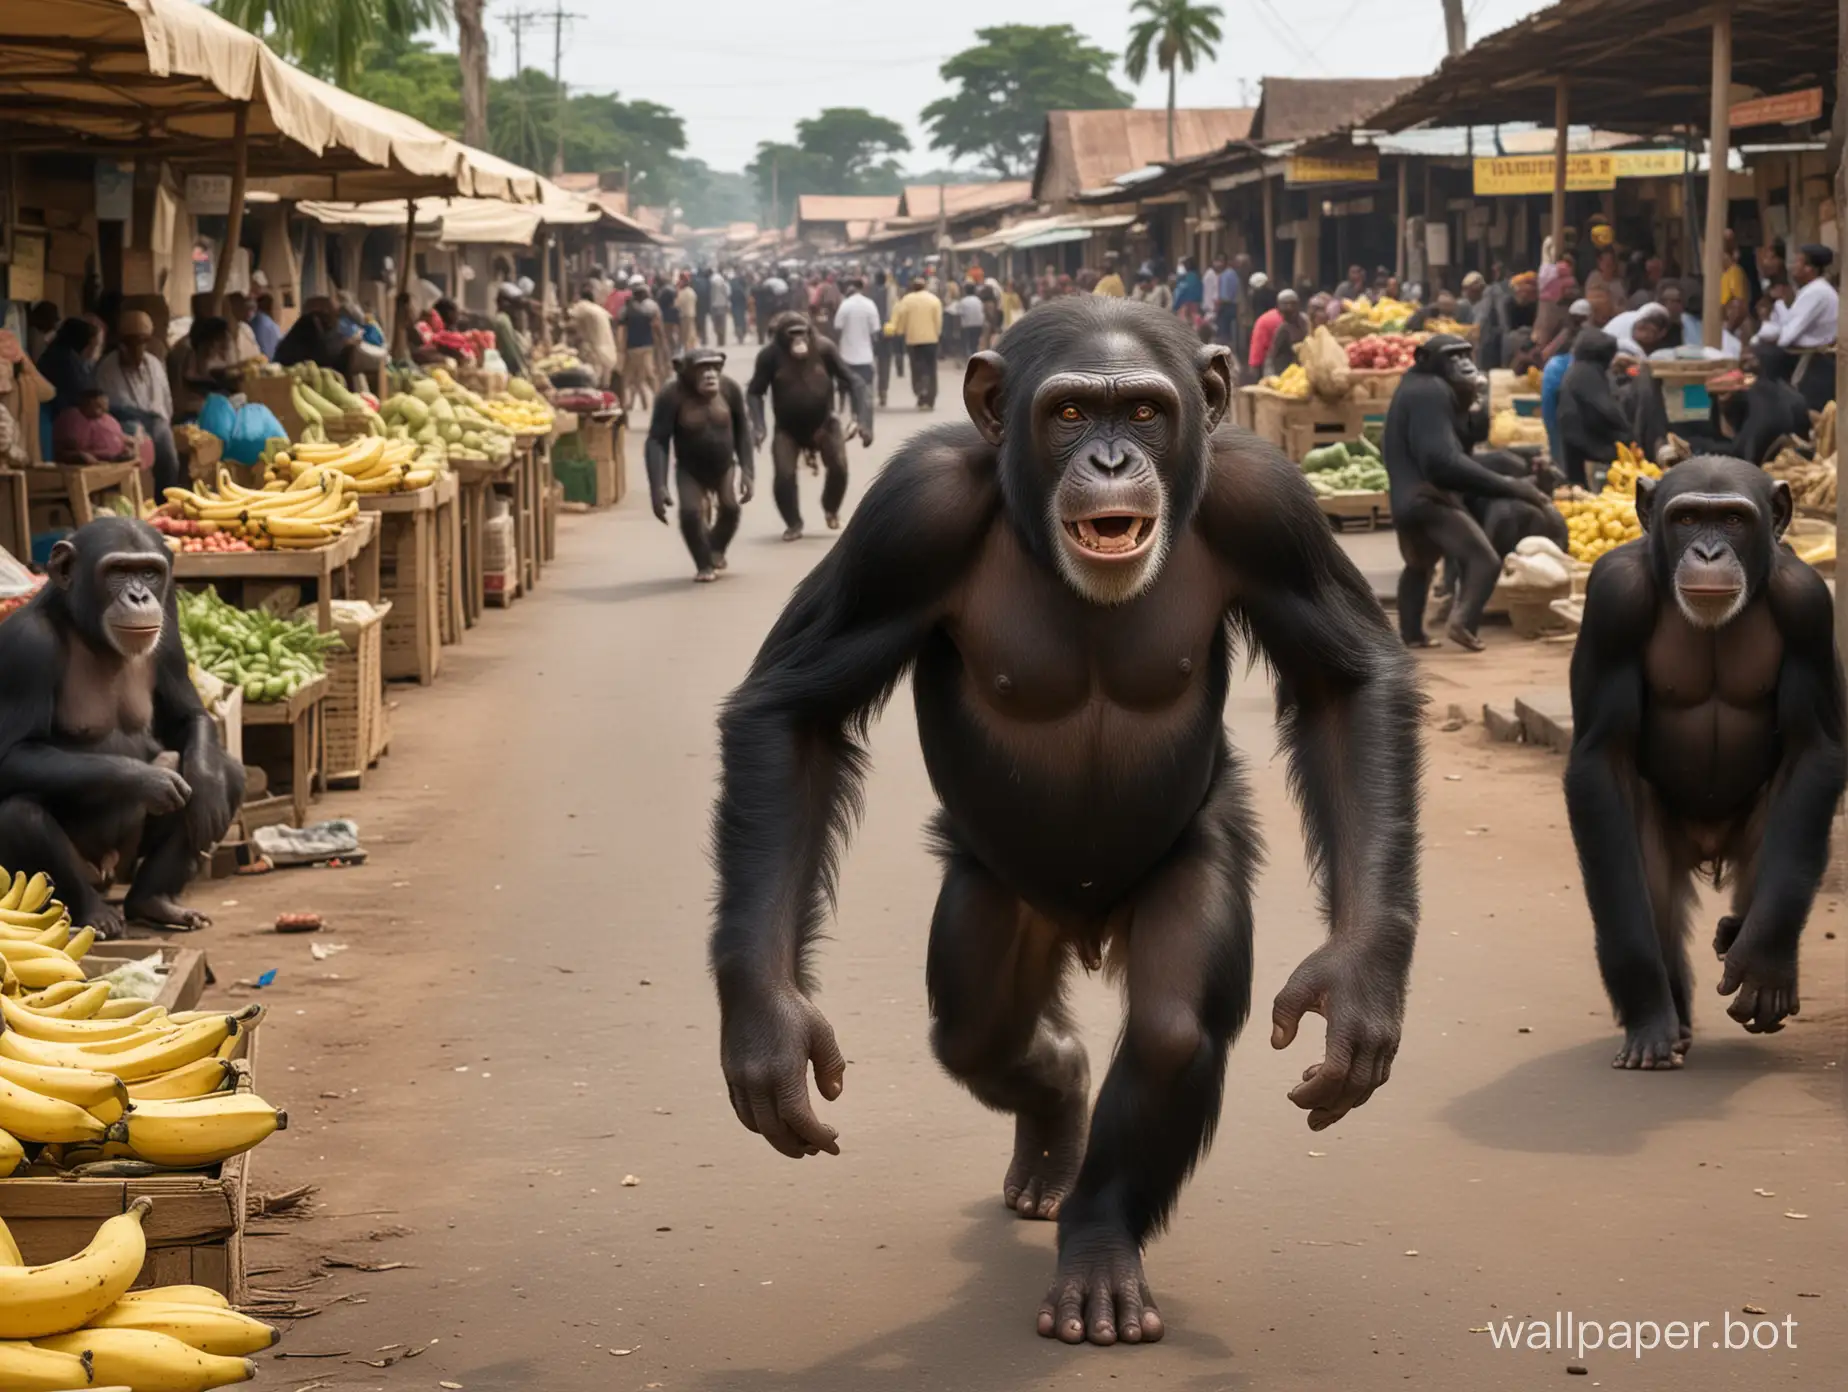 A chimpanzee has just stolen bananas at a market in Africa and runs away at full speed with them. He has a mischievous look on his face as he is being chased by the dealer. In the background, the angry dealer yells at the chimpanzee. The scene is the street of an open-air market, with stalls and more people strolling., photo, realistic